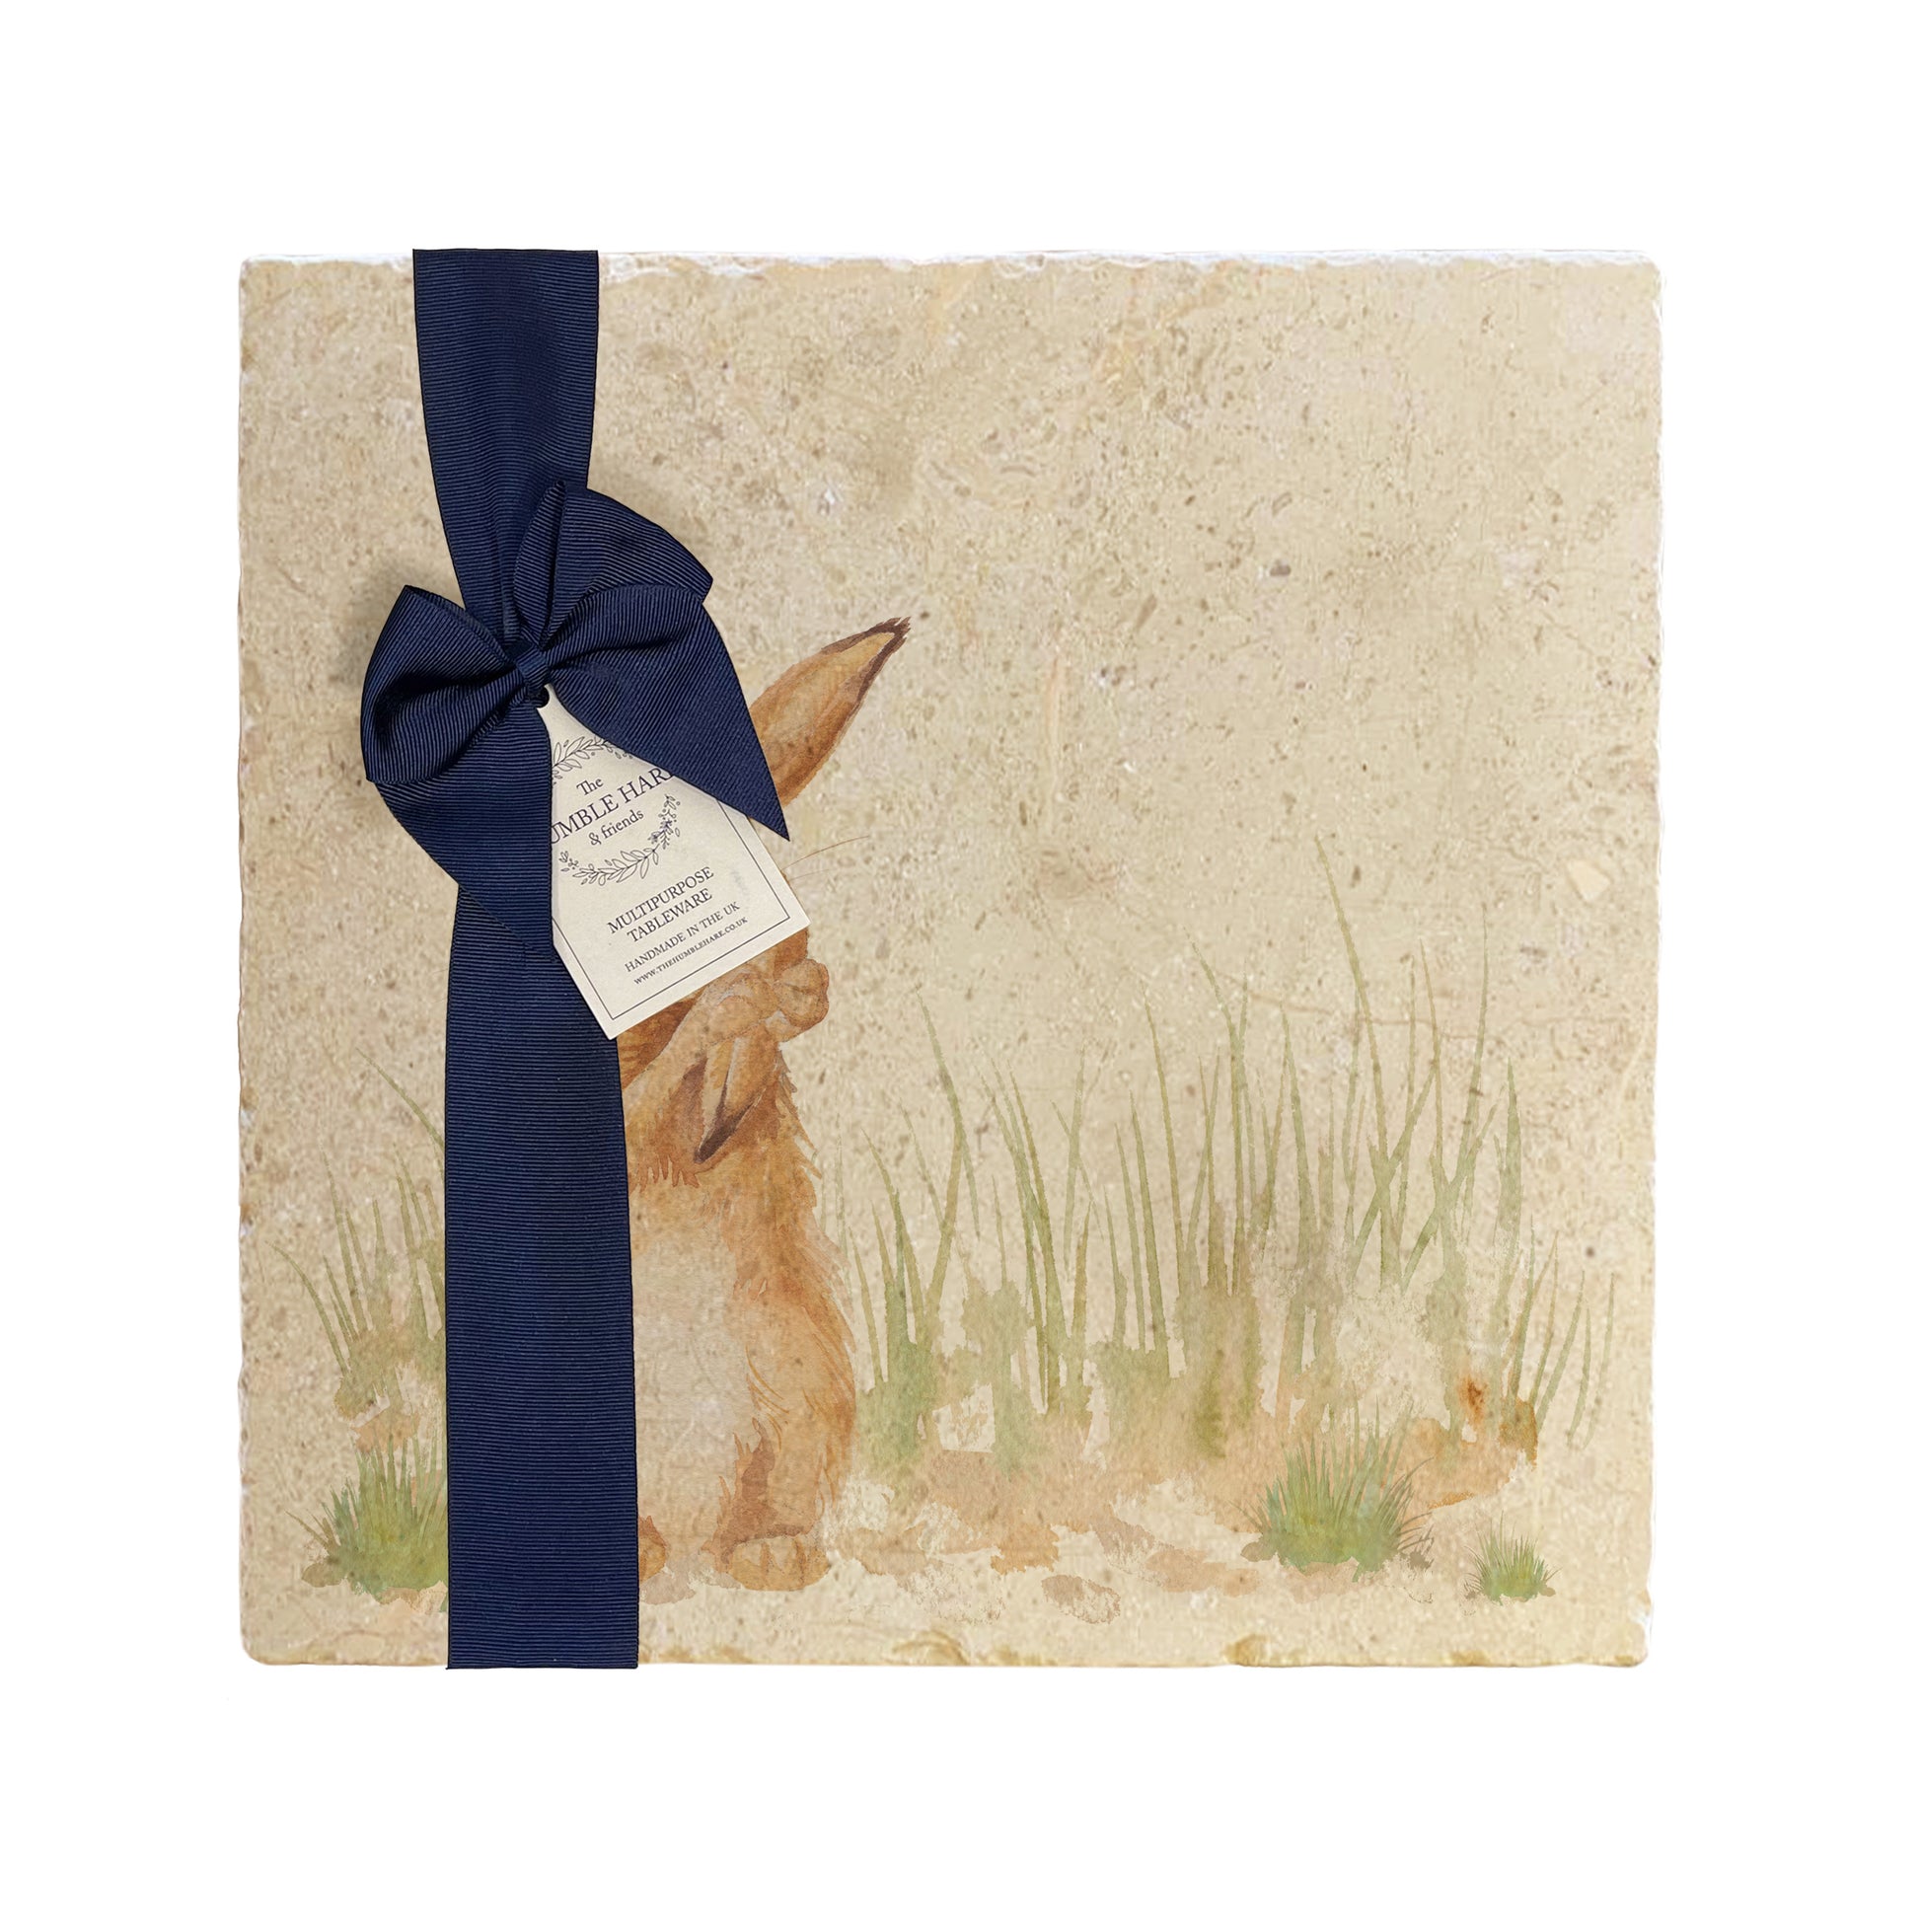  A multipurpose marble platter with a design featuring a hare washing his ear, packaged with a luxurious dark blue bow and branded gift tag.